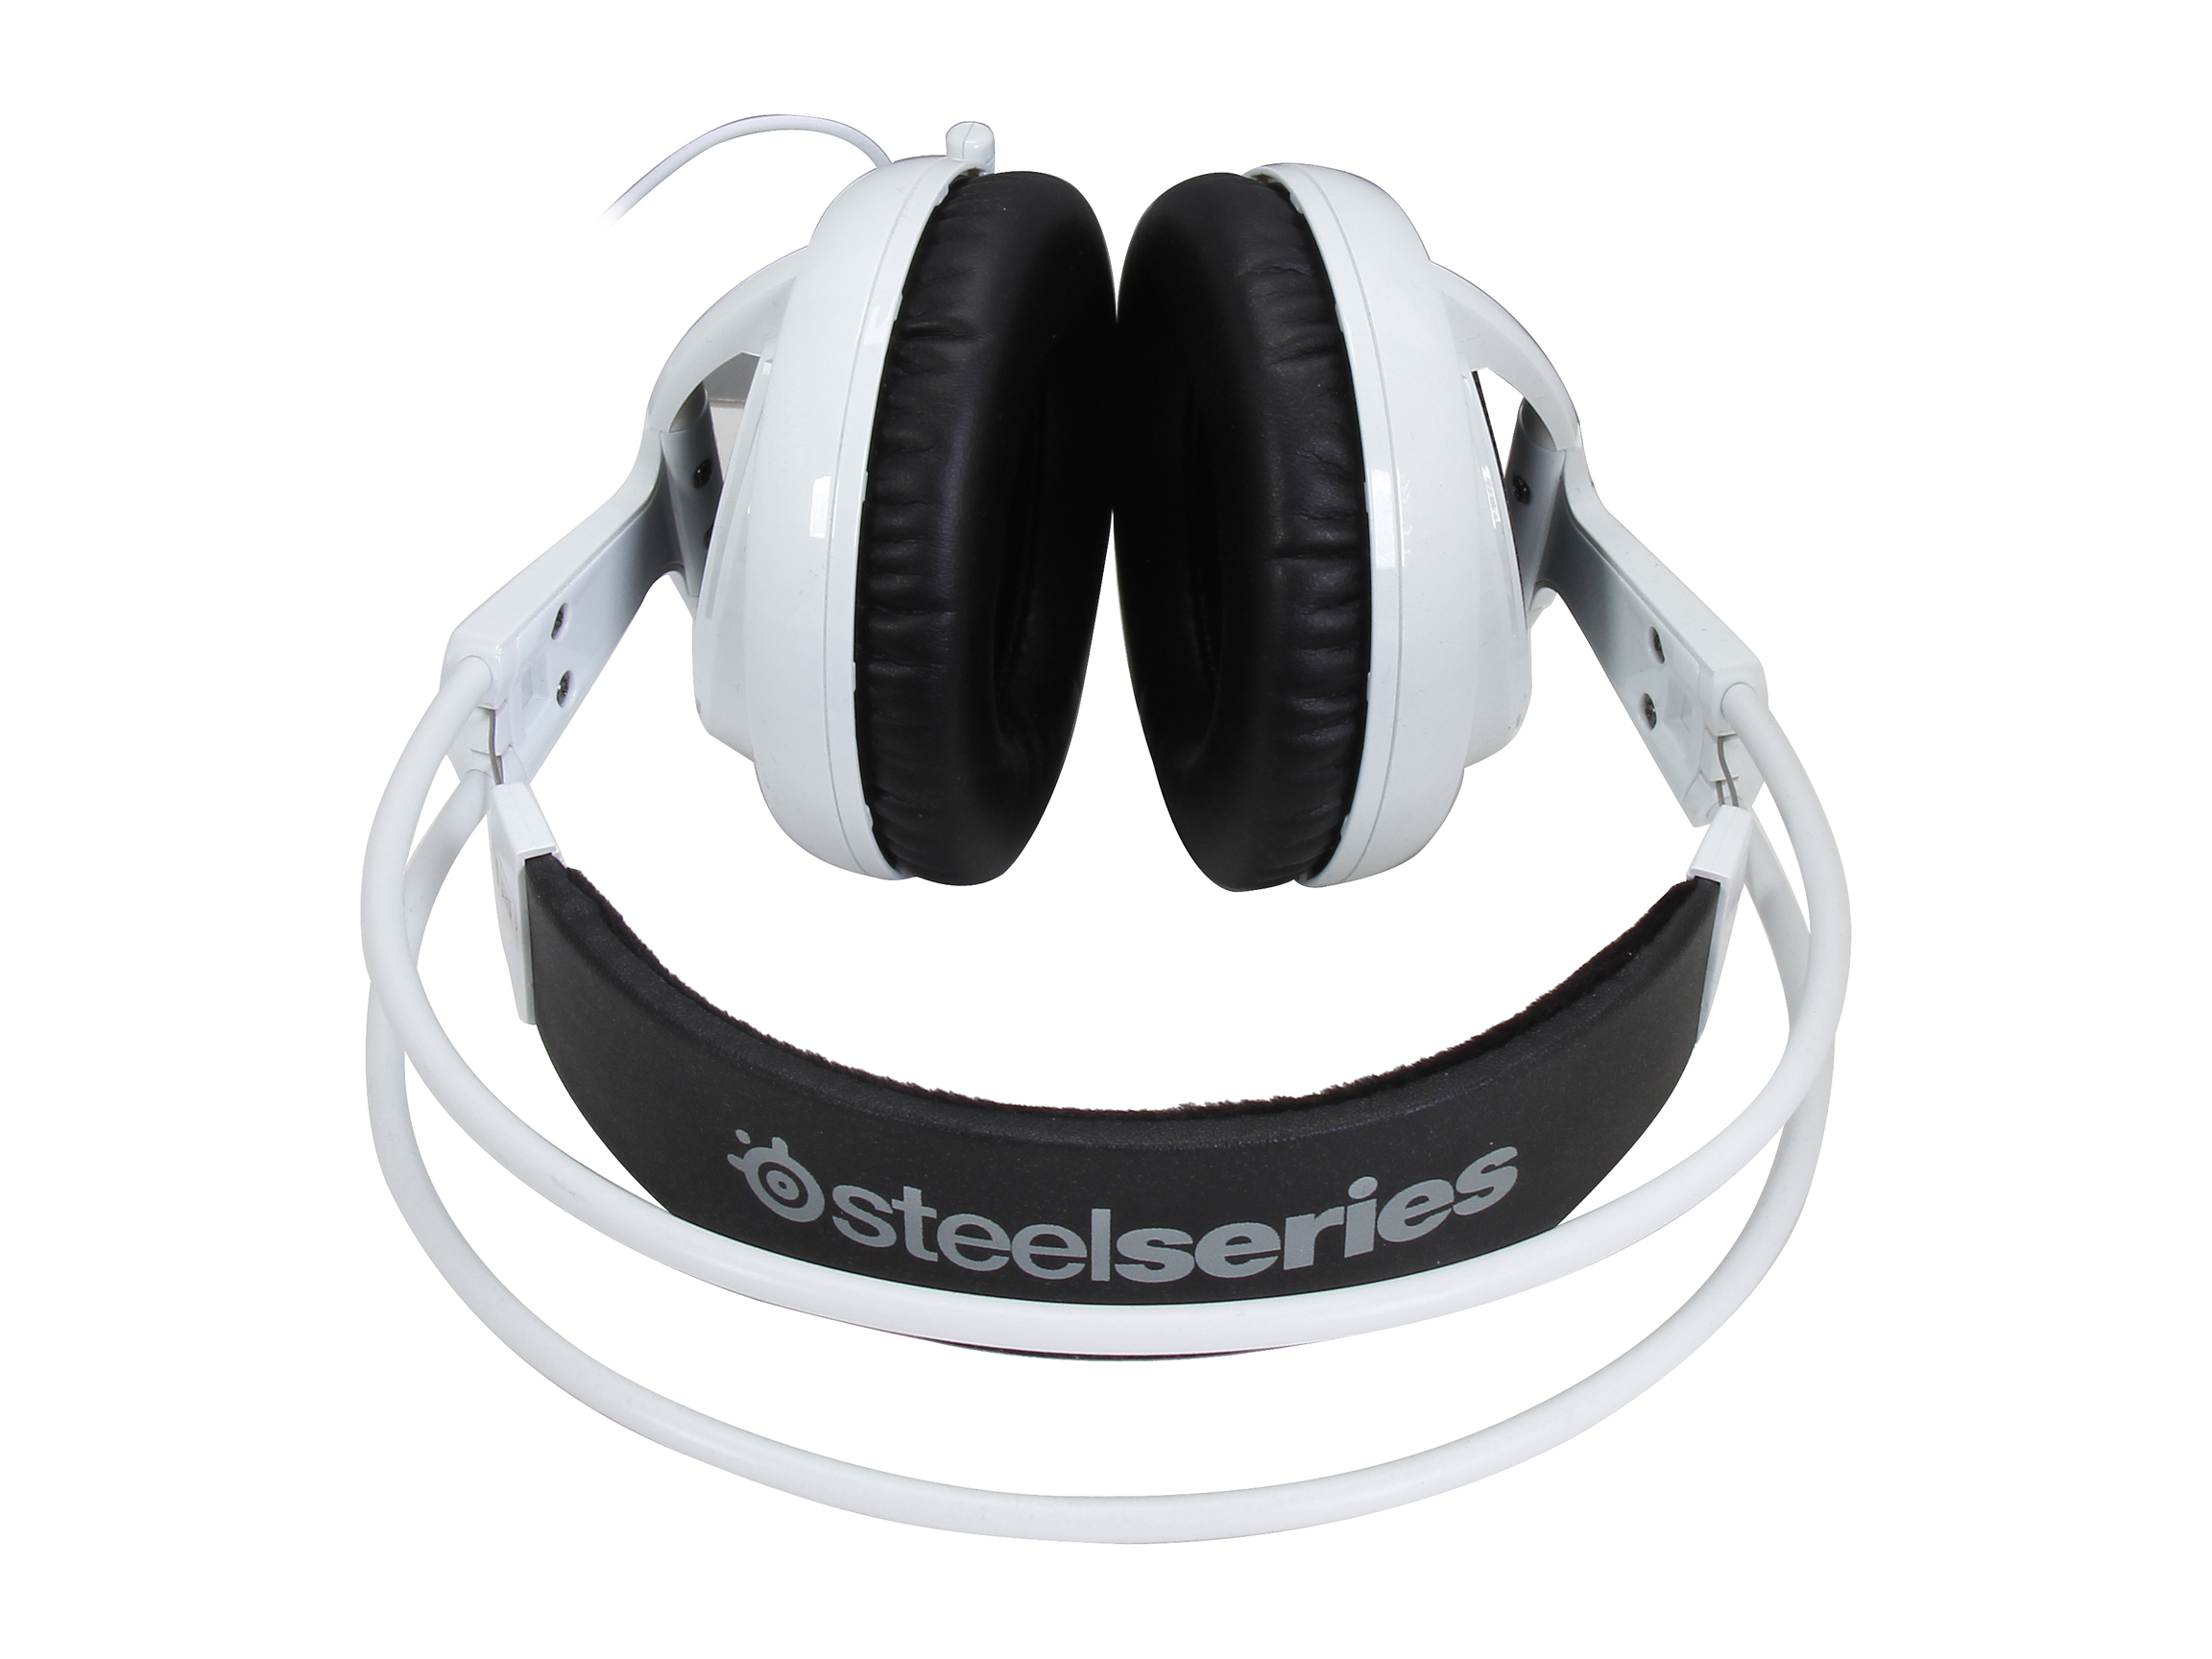 ... Circumaural Full-size Headset for iphone, ipod, mp3 player - White